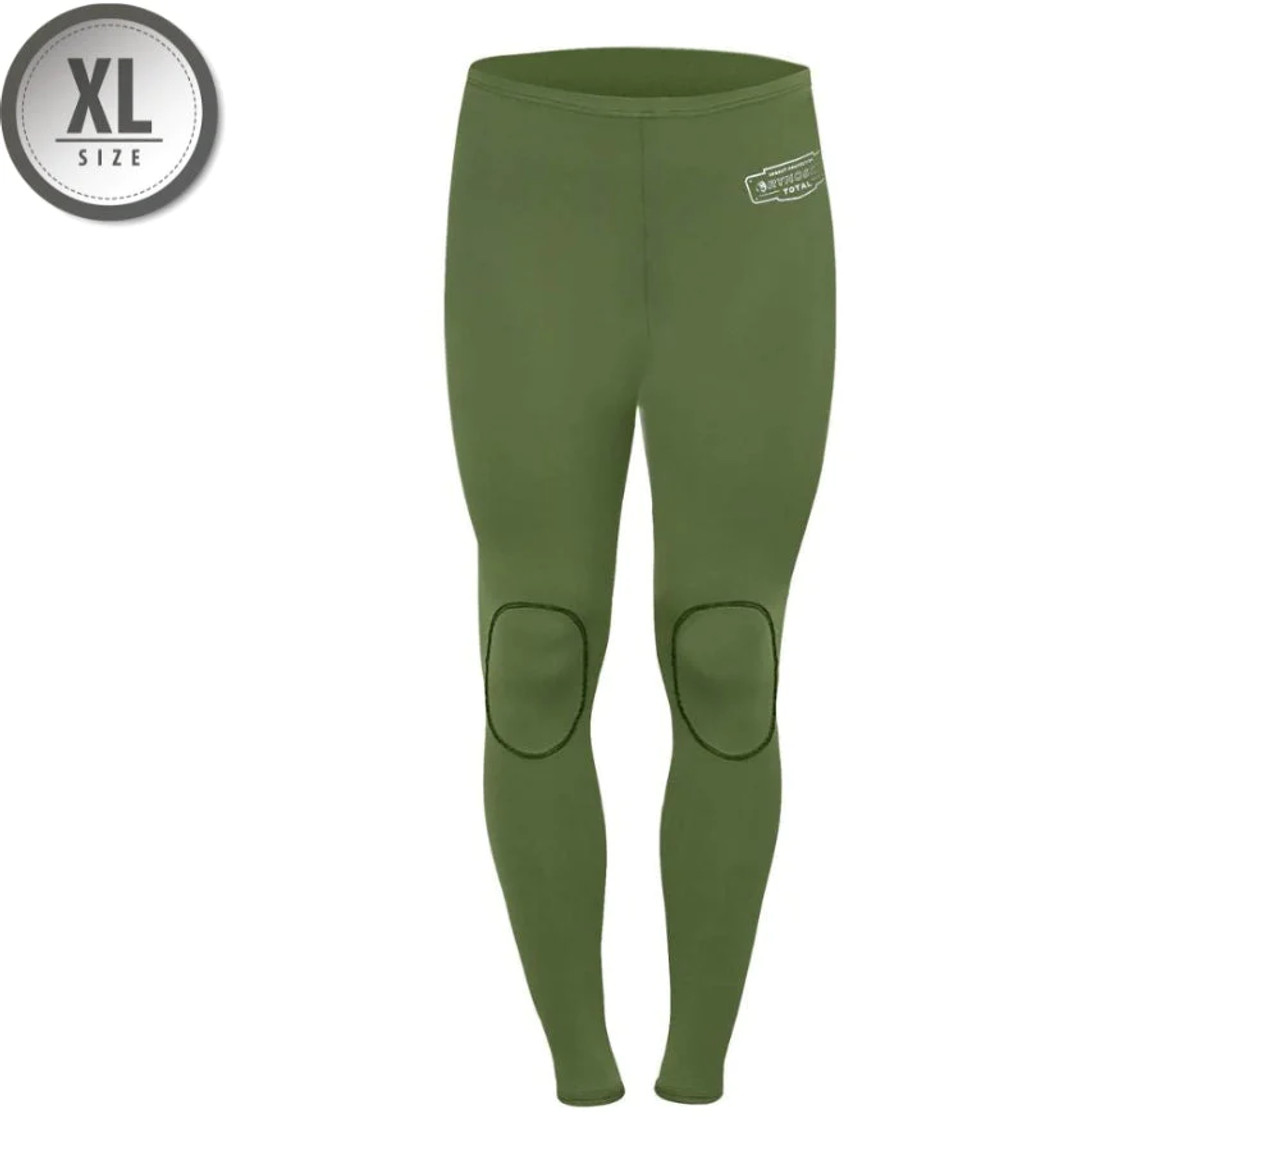 Rynoskin Hunting Pants with Insect & UV Protection, X-Large, Green